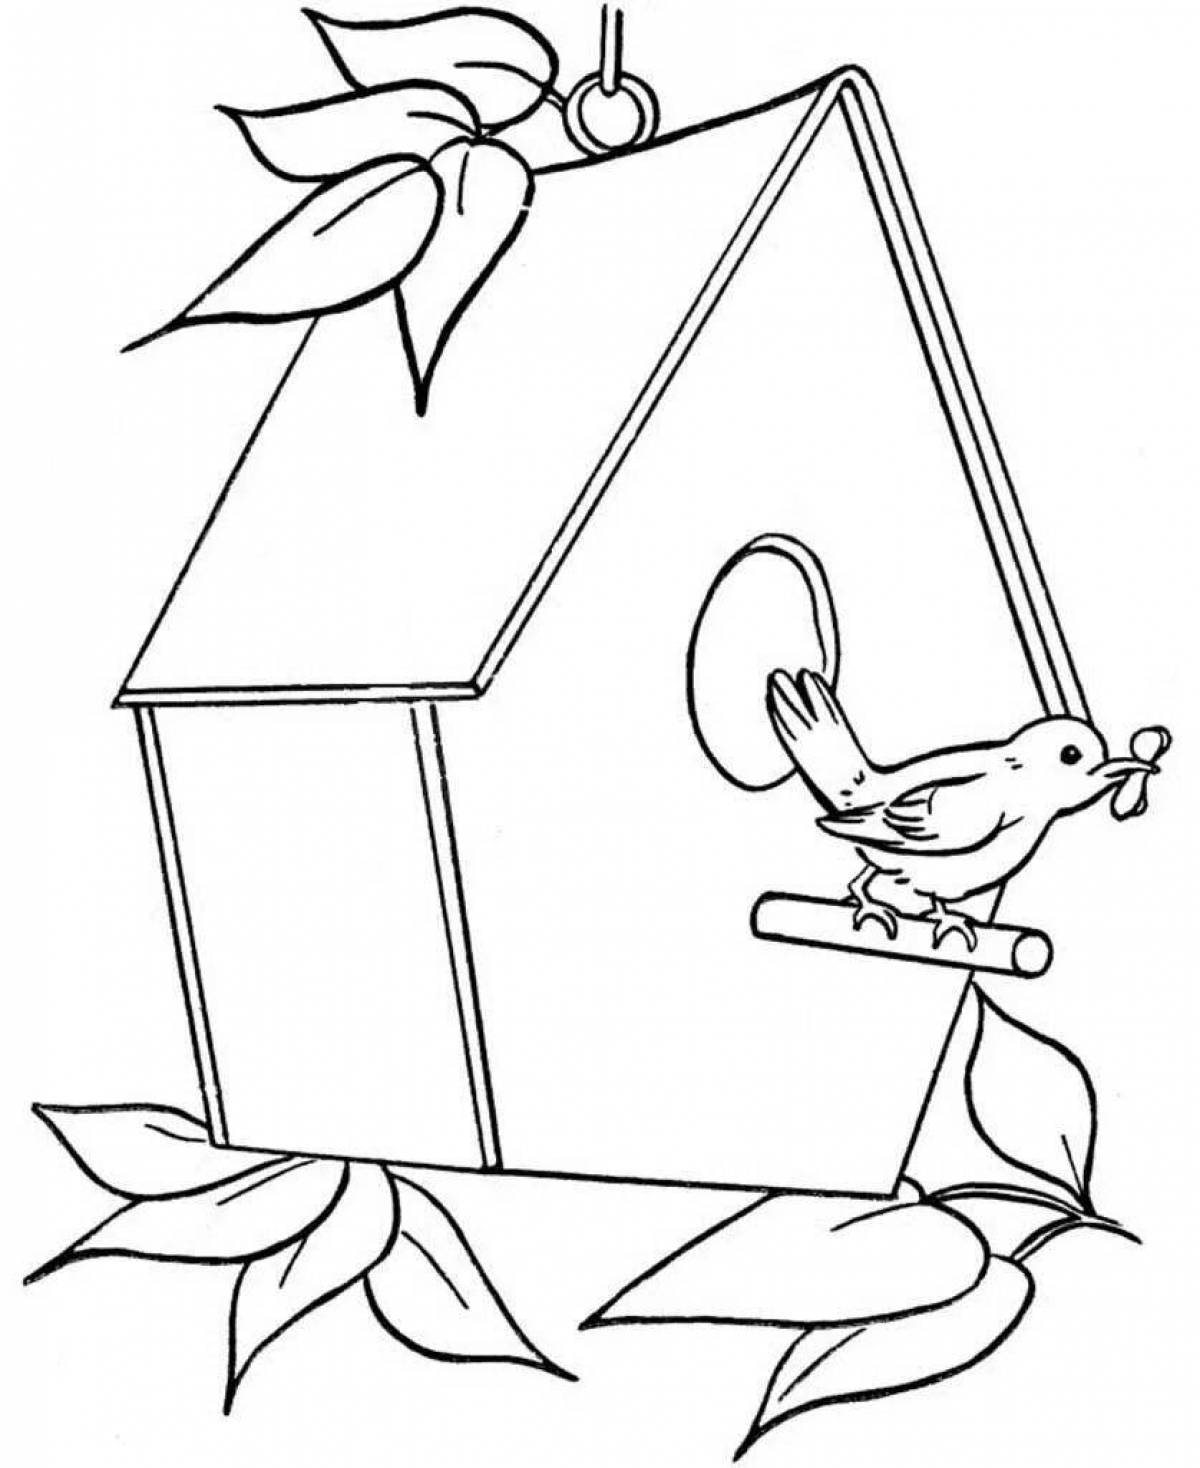 Playful bird feeder coloring page for kids